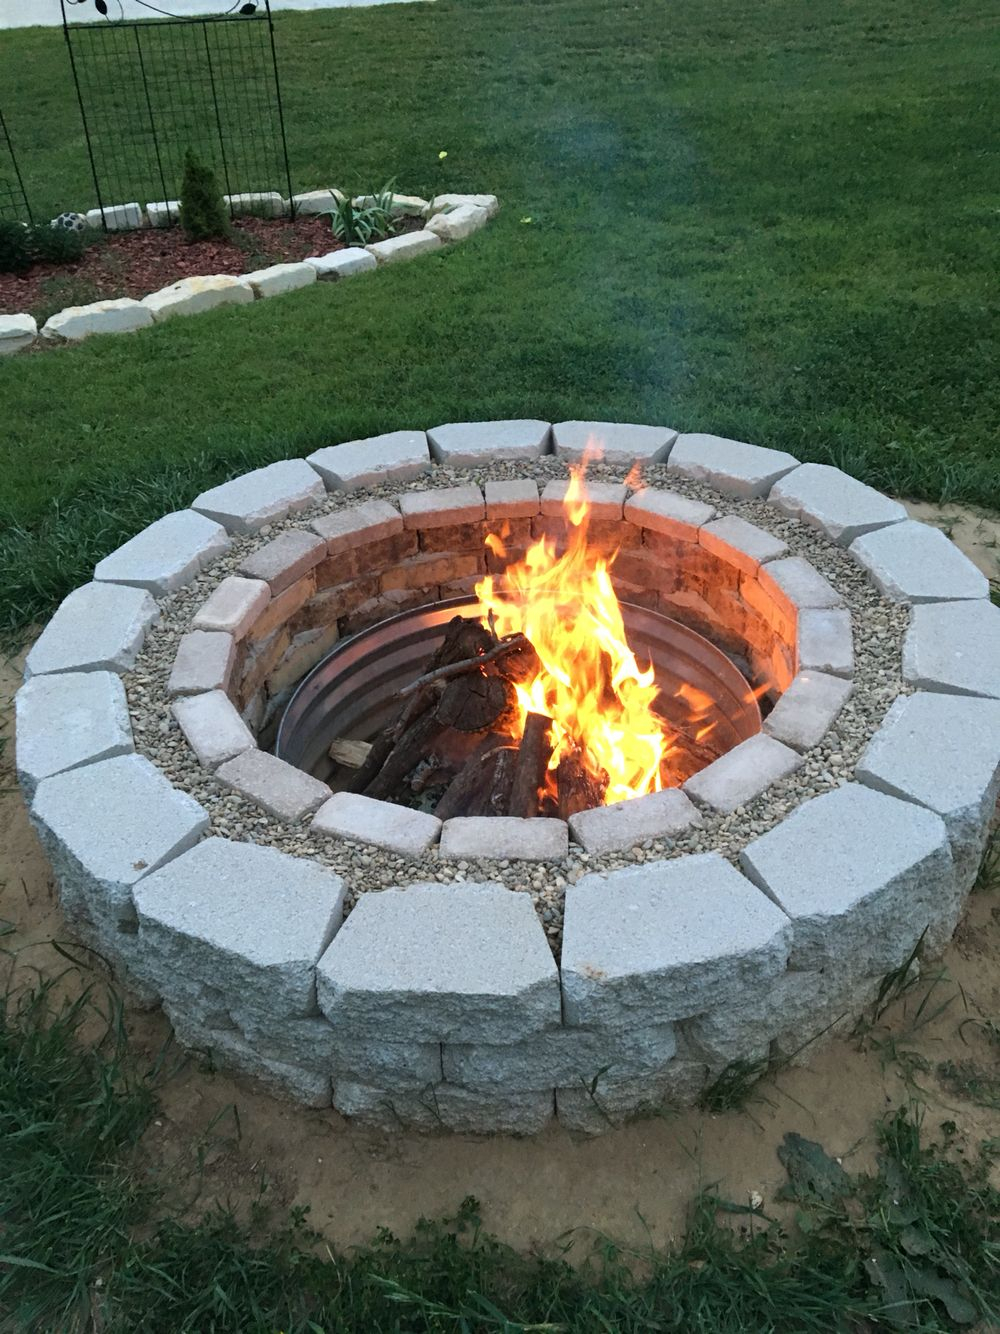 Brick Fire Pit Wall Brick square patio pit fire backyard bench outdoor firepits braais seating wall bestfirepitideas bricks designs firepit south african barbeques screen